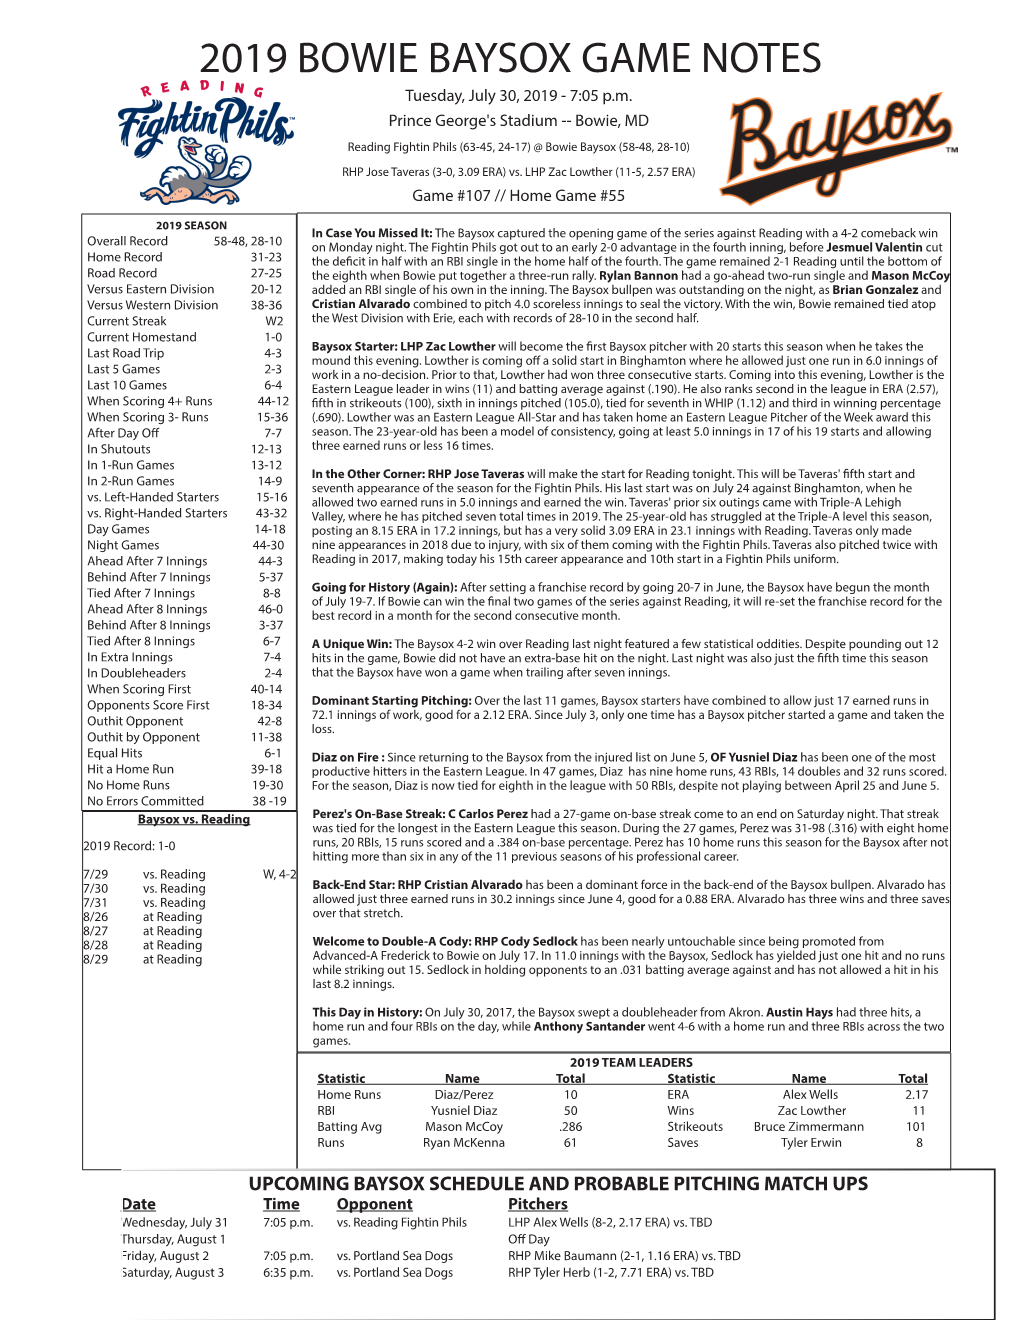 2019 BOWIE BAYSOX GAME NOTES Tuesday, July 30, 2019 - 7:05 P.M